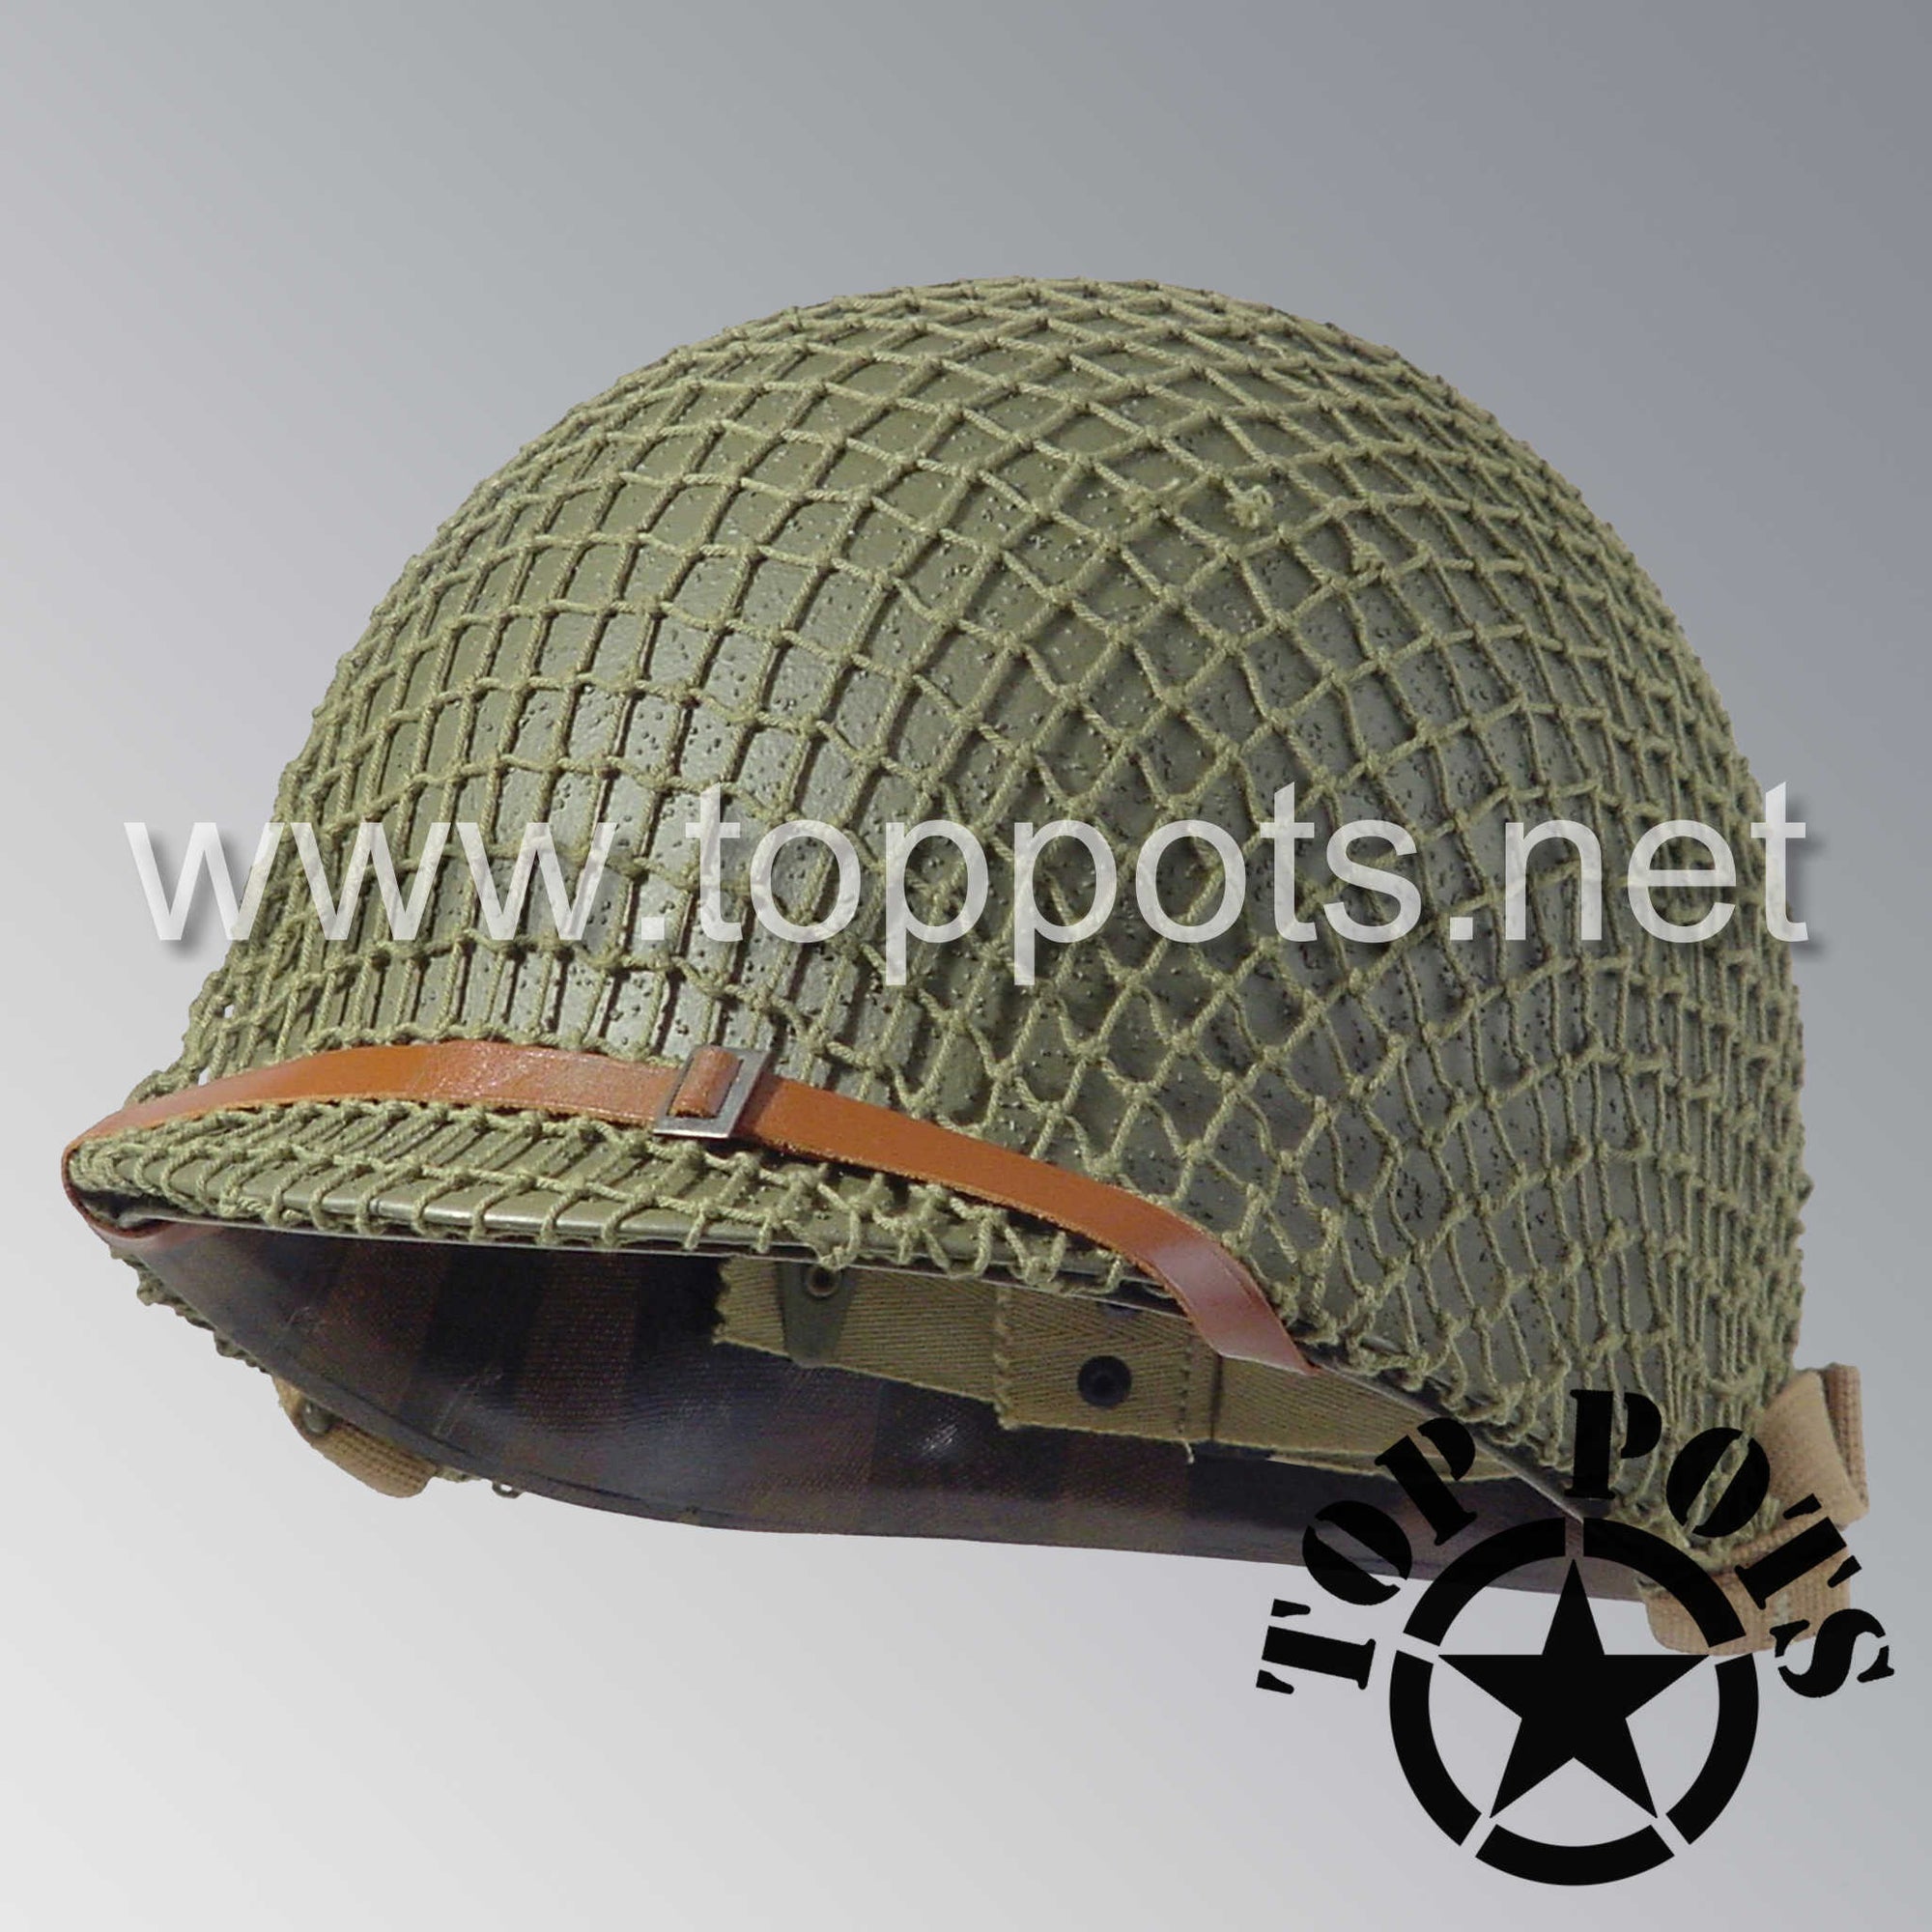 WWII US Army Restored Original M1 Infantry Helmet Fix Bale Shell and Liner with Early War Leather Chinstrap and OD 3 Net